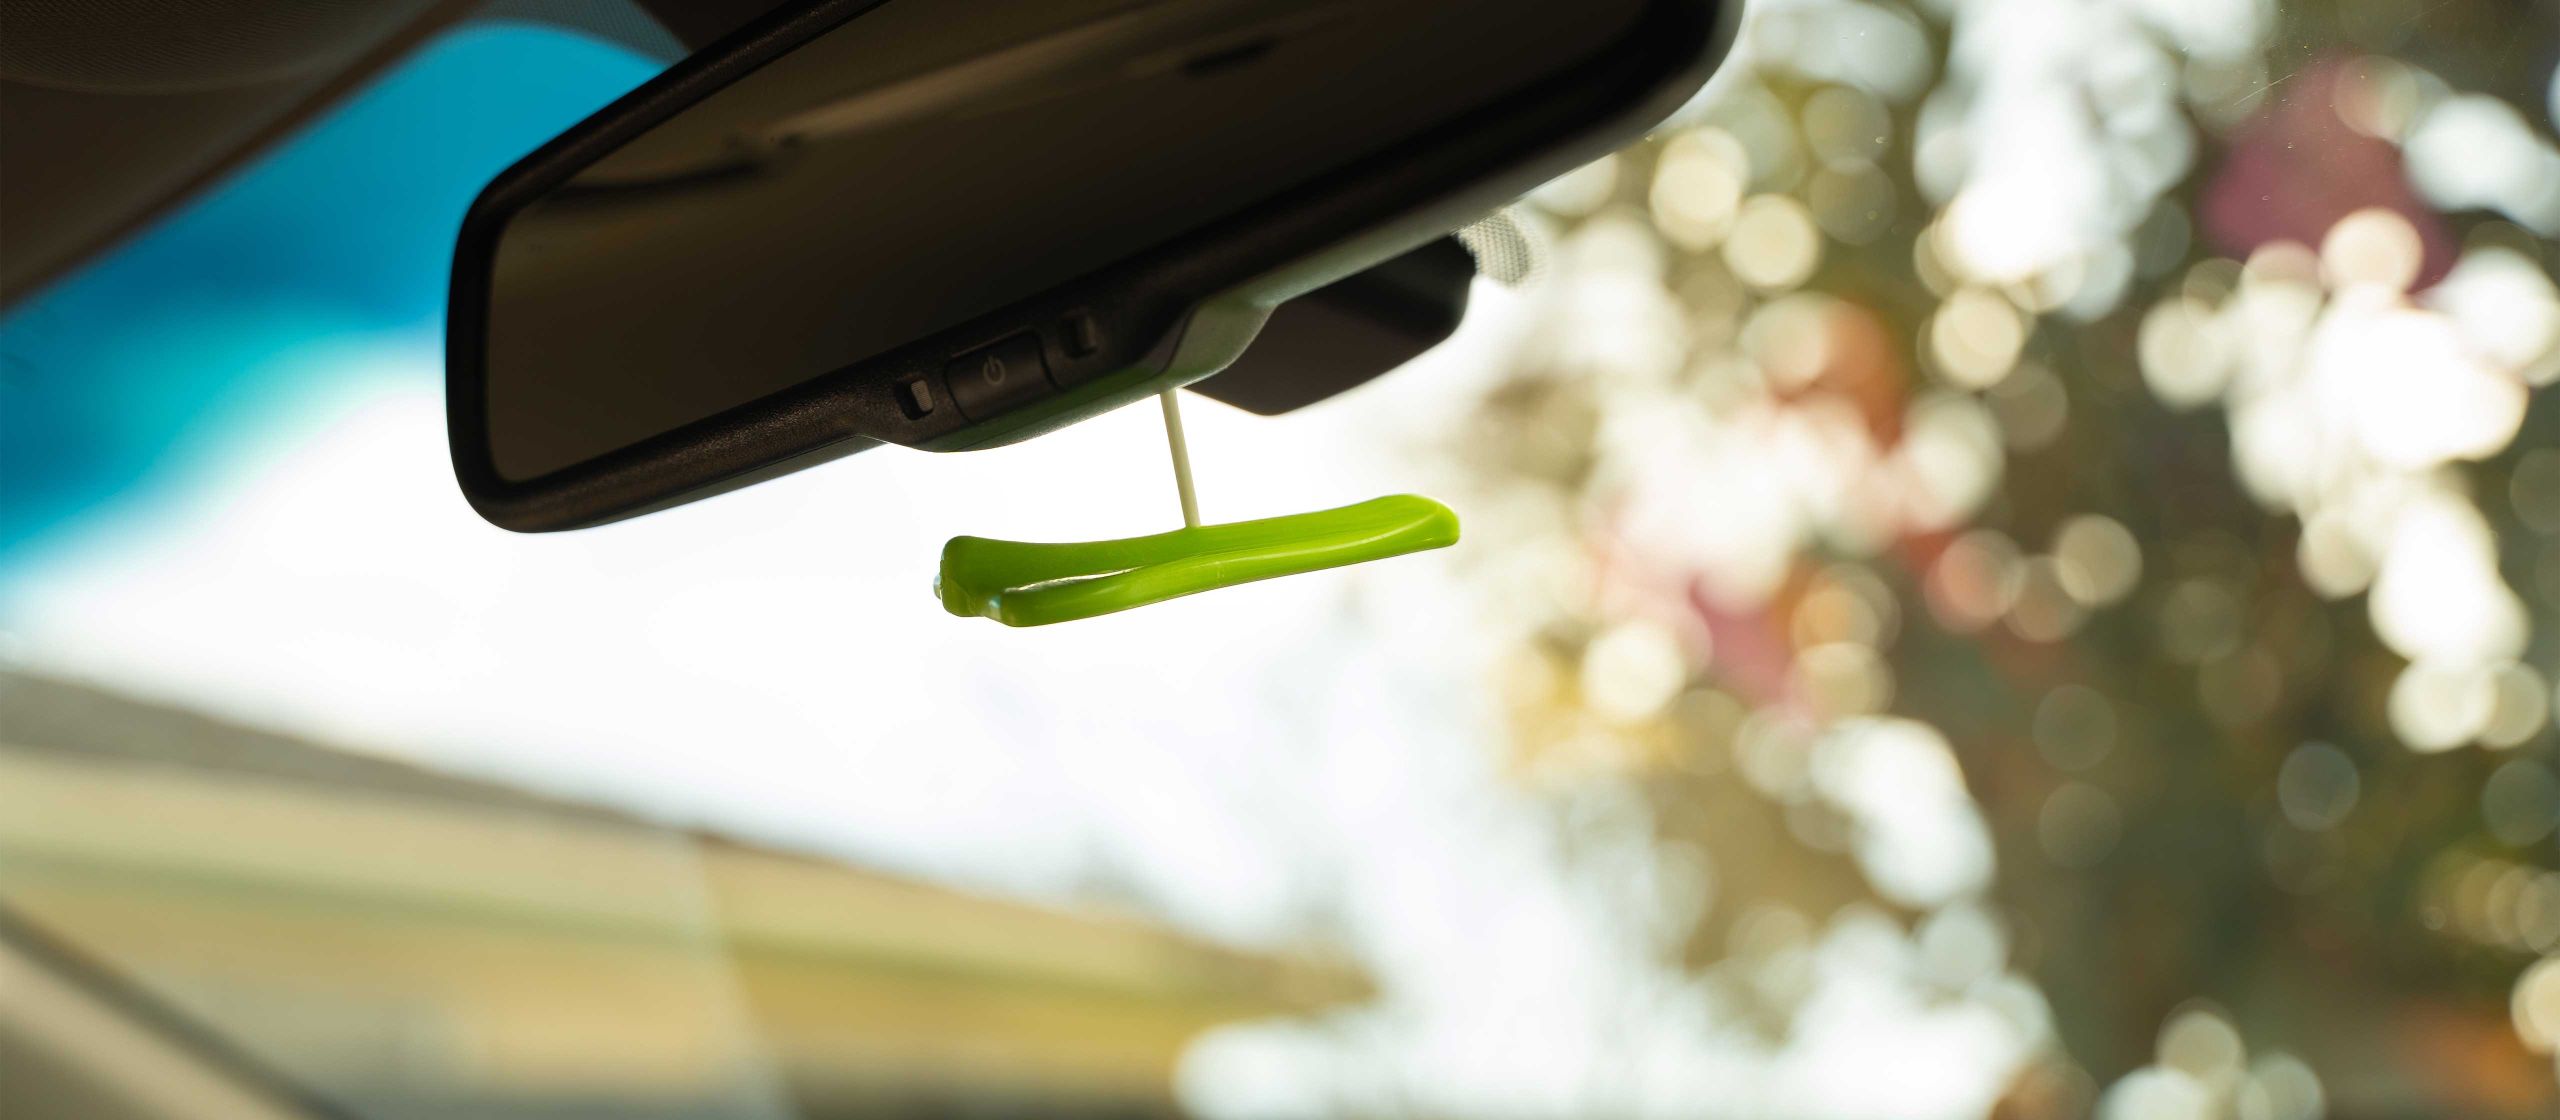 Jelly Jets Bubble Gum Air Freshener hanging from car mirror